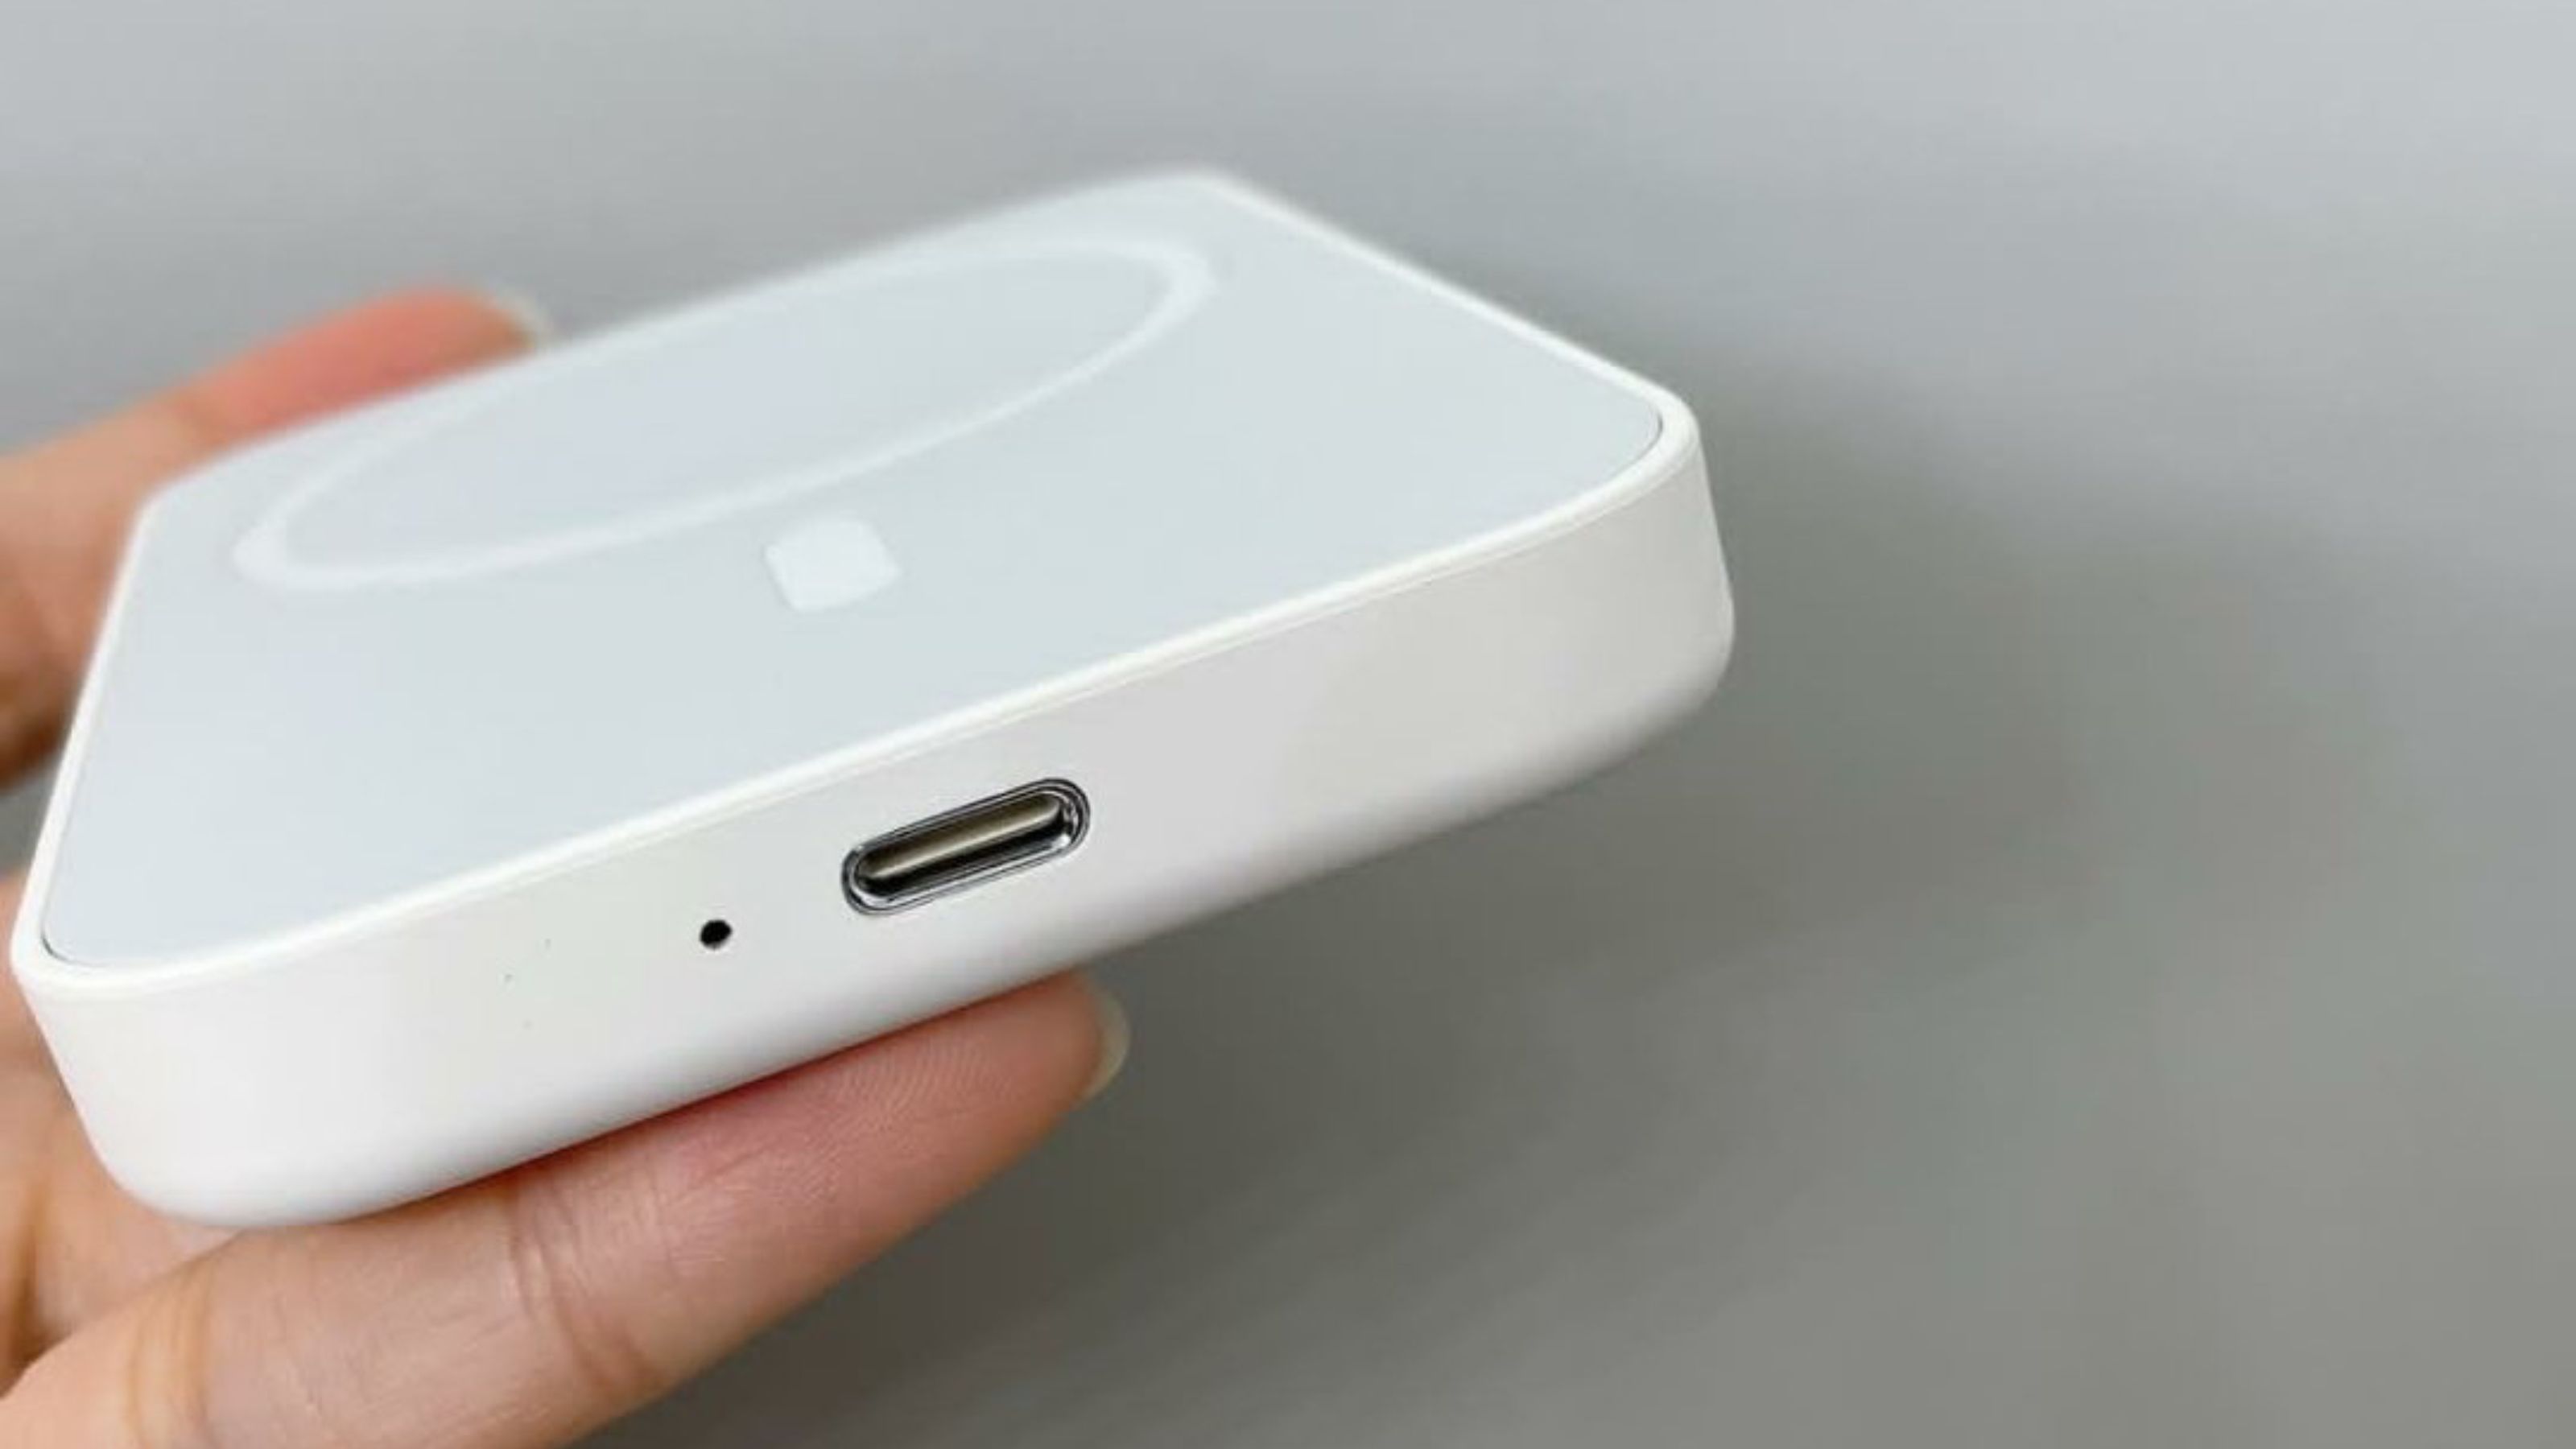 This MagSafe power bank is cheaper and faster than Apple's, and on